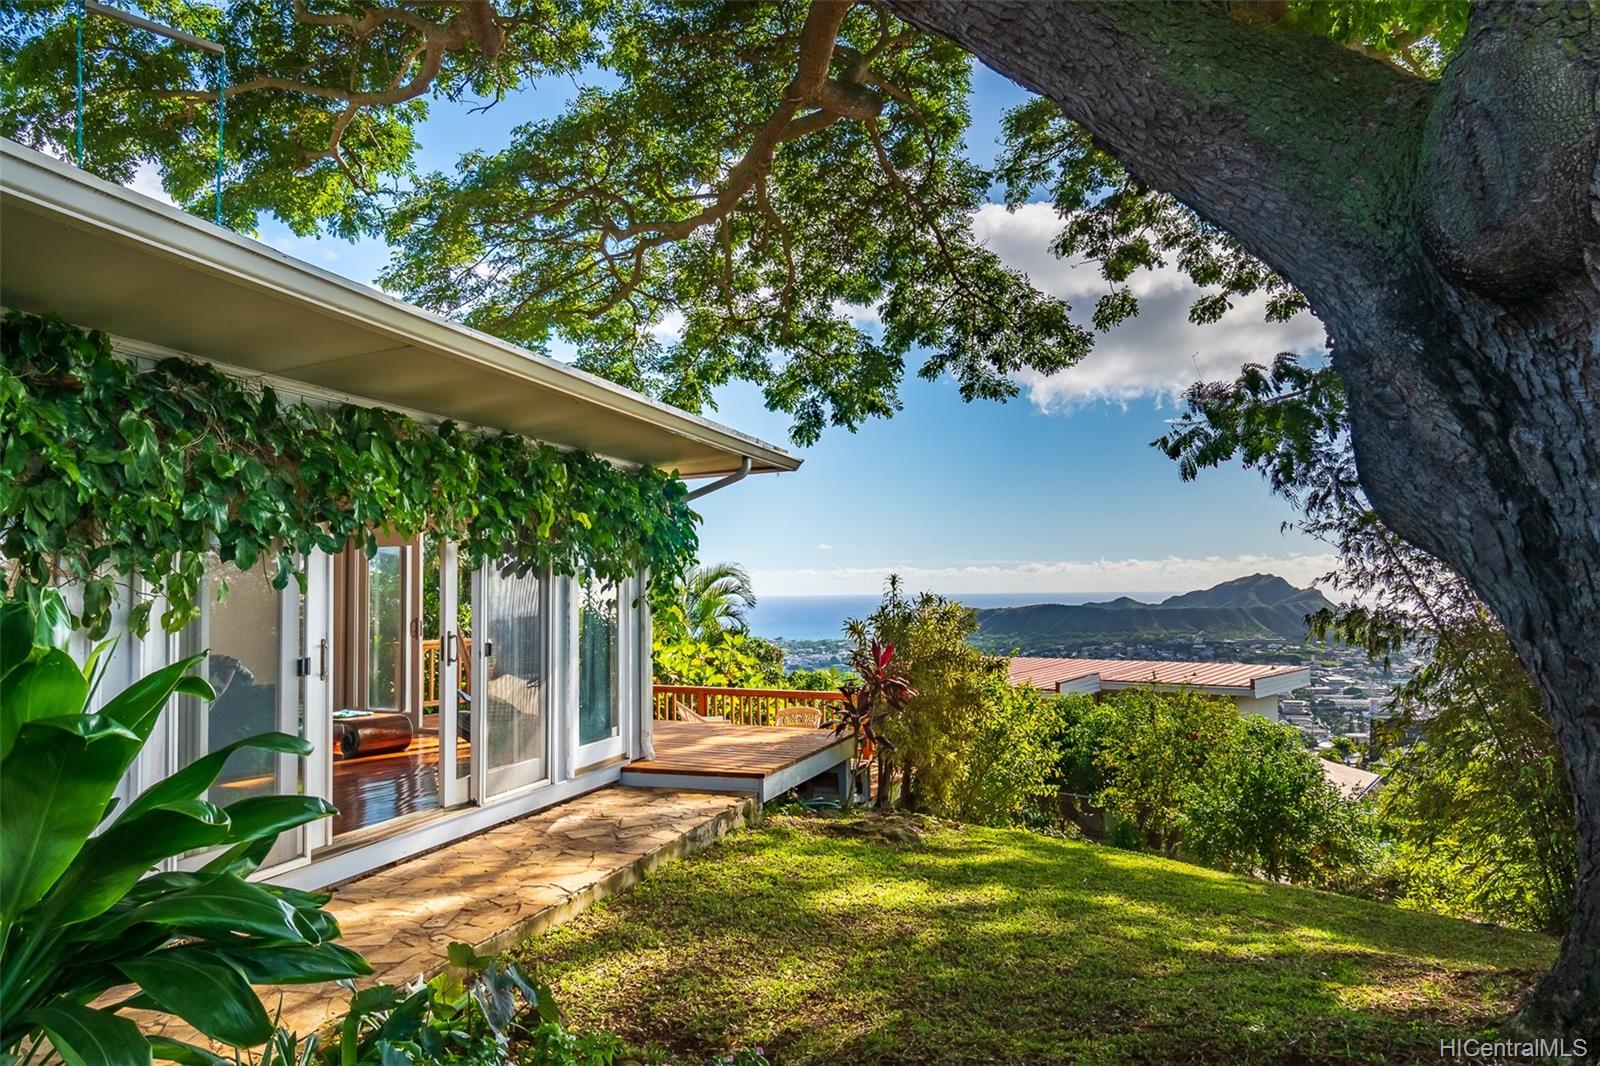 Hawaii Hard Money Lending With increasing environmental awareness and commitment to sustainability, we might see more eco-friendly building materials and energy-efficient home designs becoming popular in Hawaii.